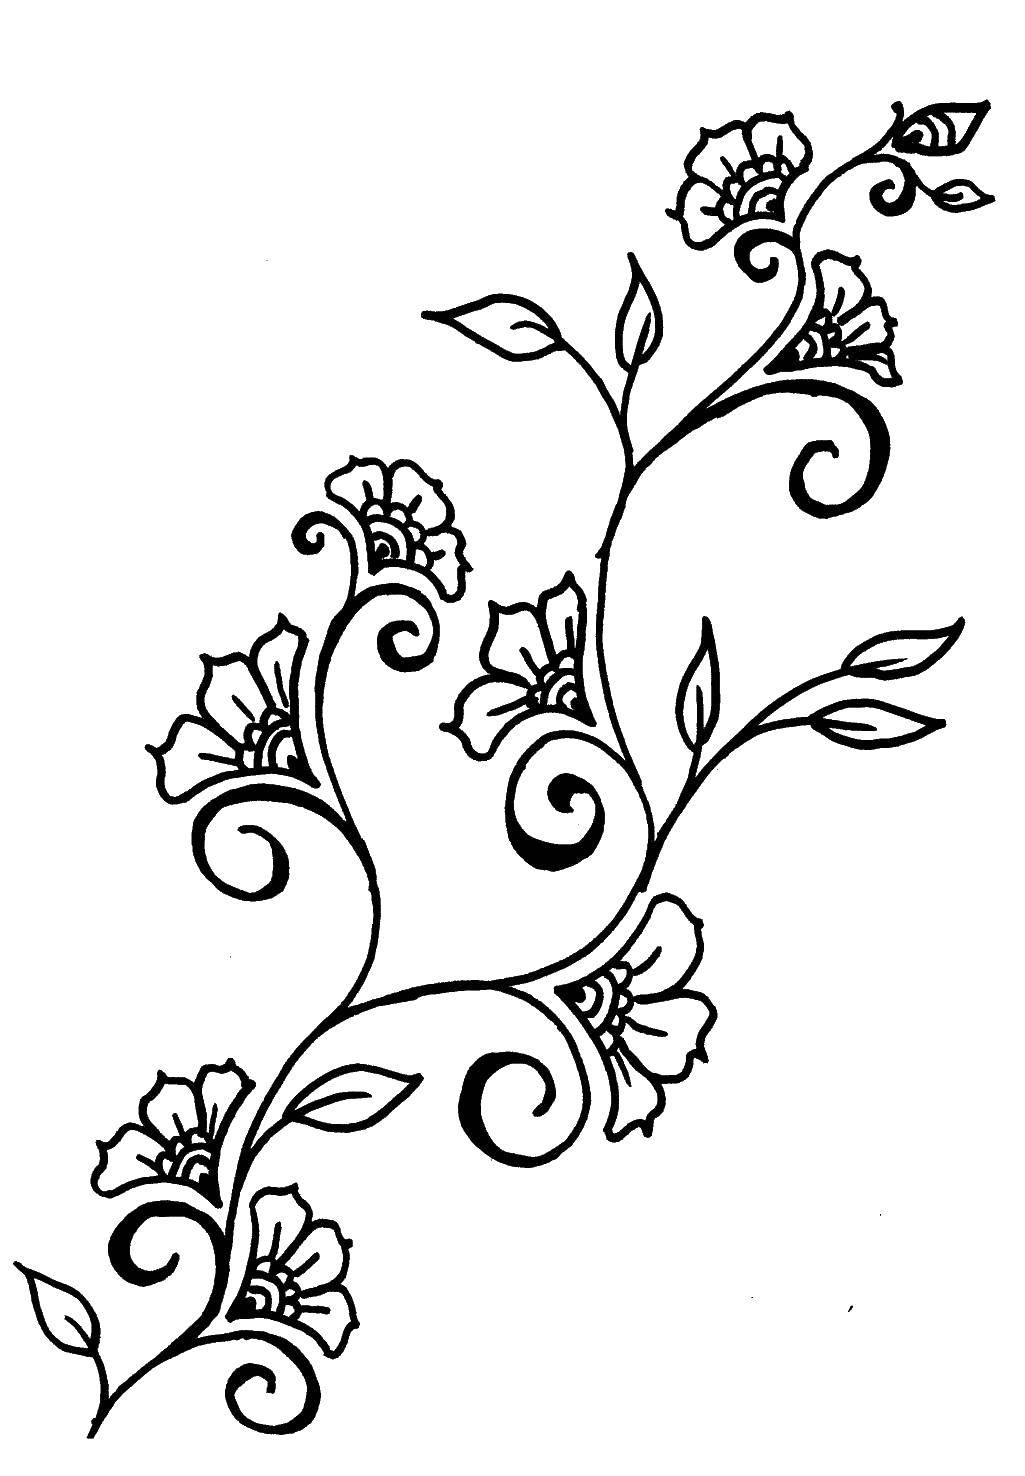 Coloring Flowers. Category flowers. Tags:  Flowers.